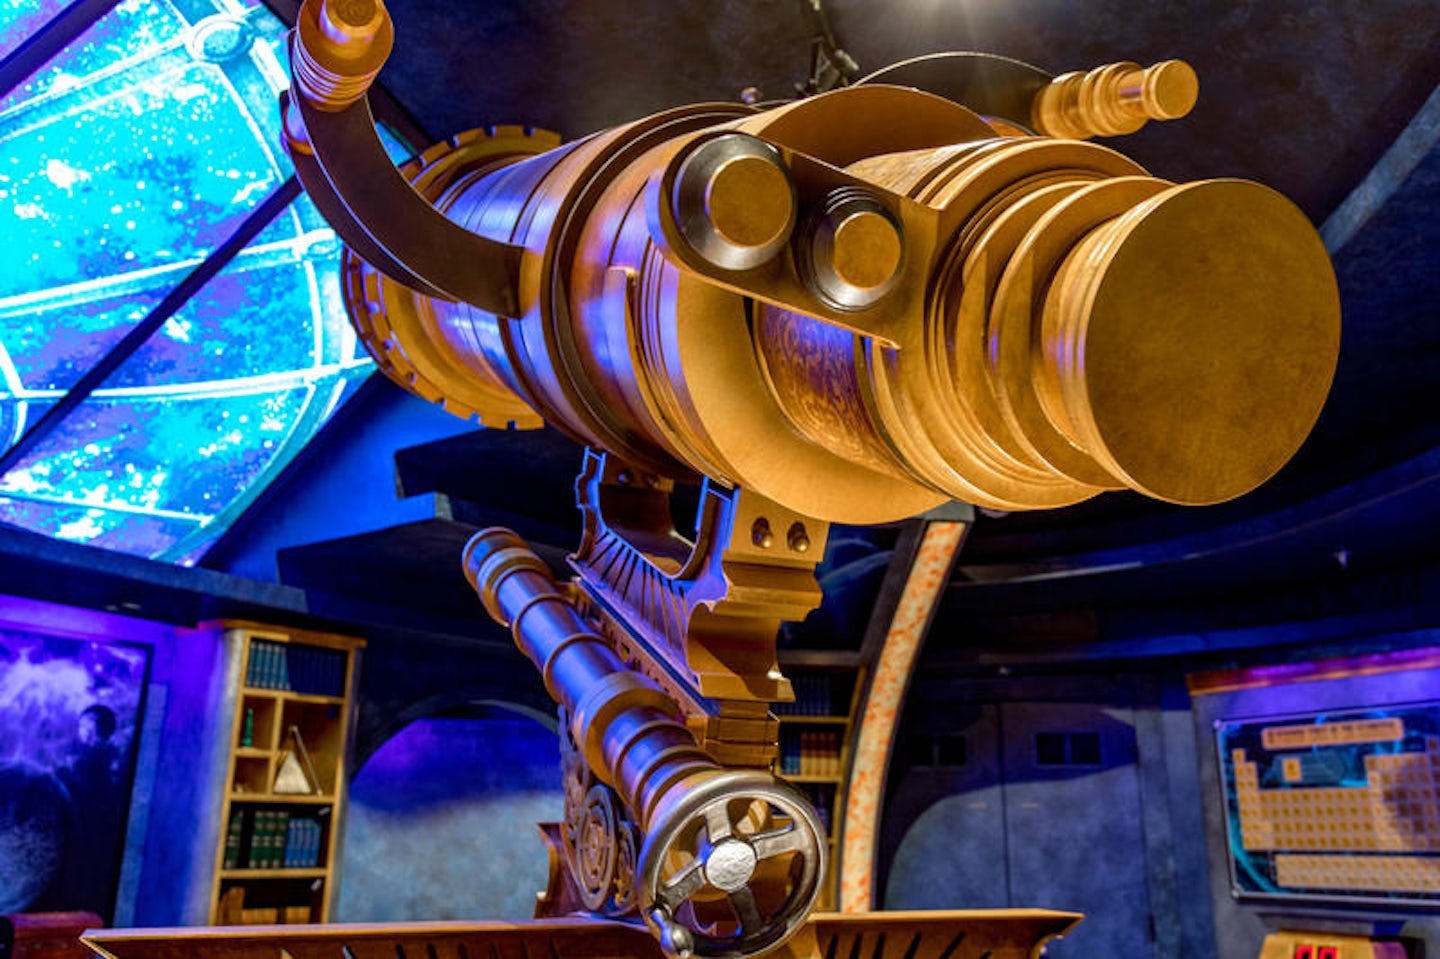 The Observatorium Escape Room on Independence of the Seas